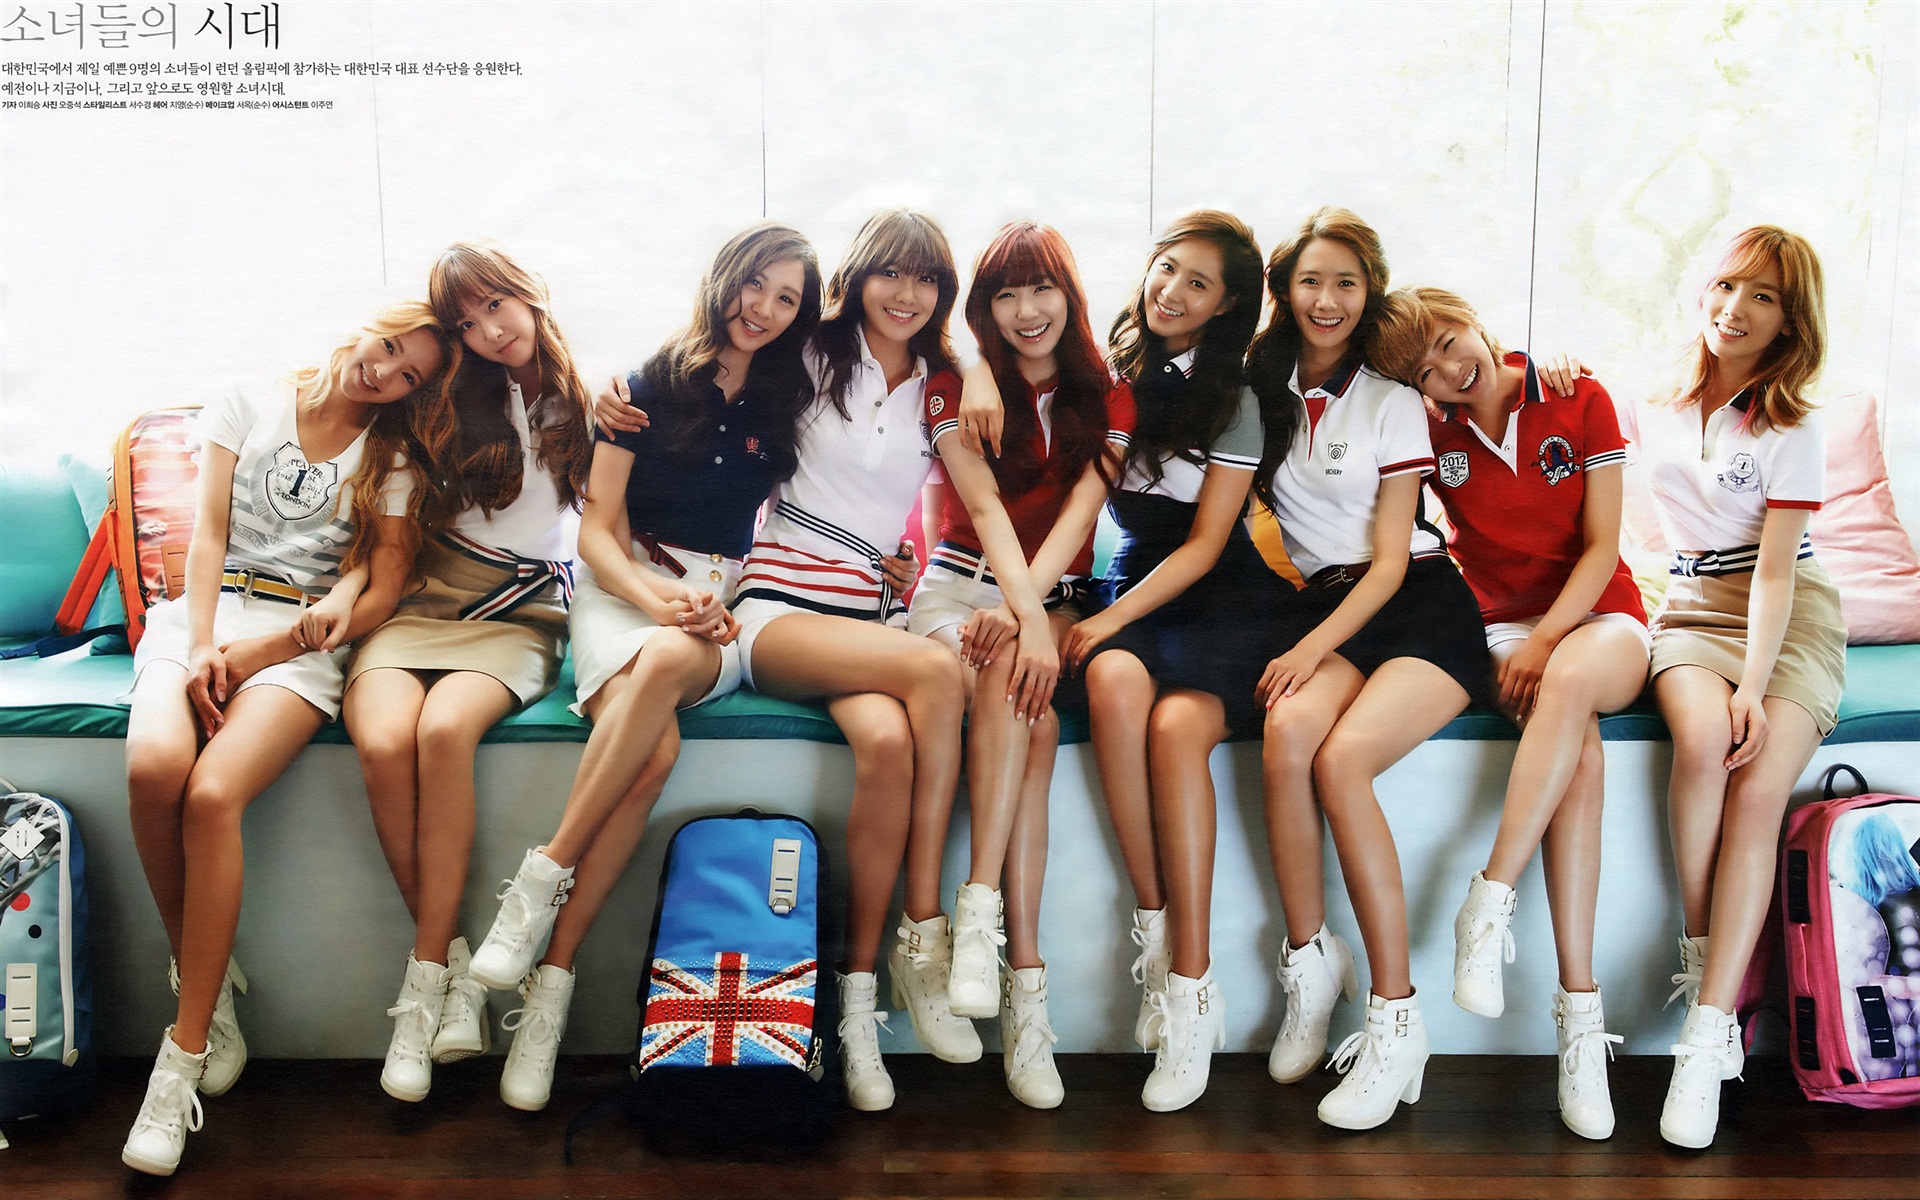 Girls Generation latest HD wallpapers collection #1 - 1920x1200